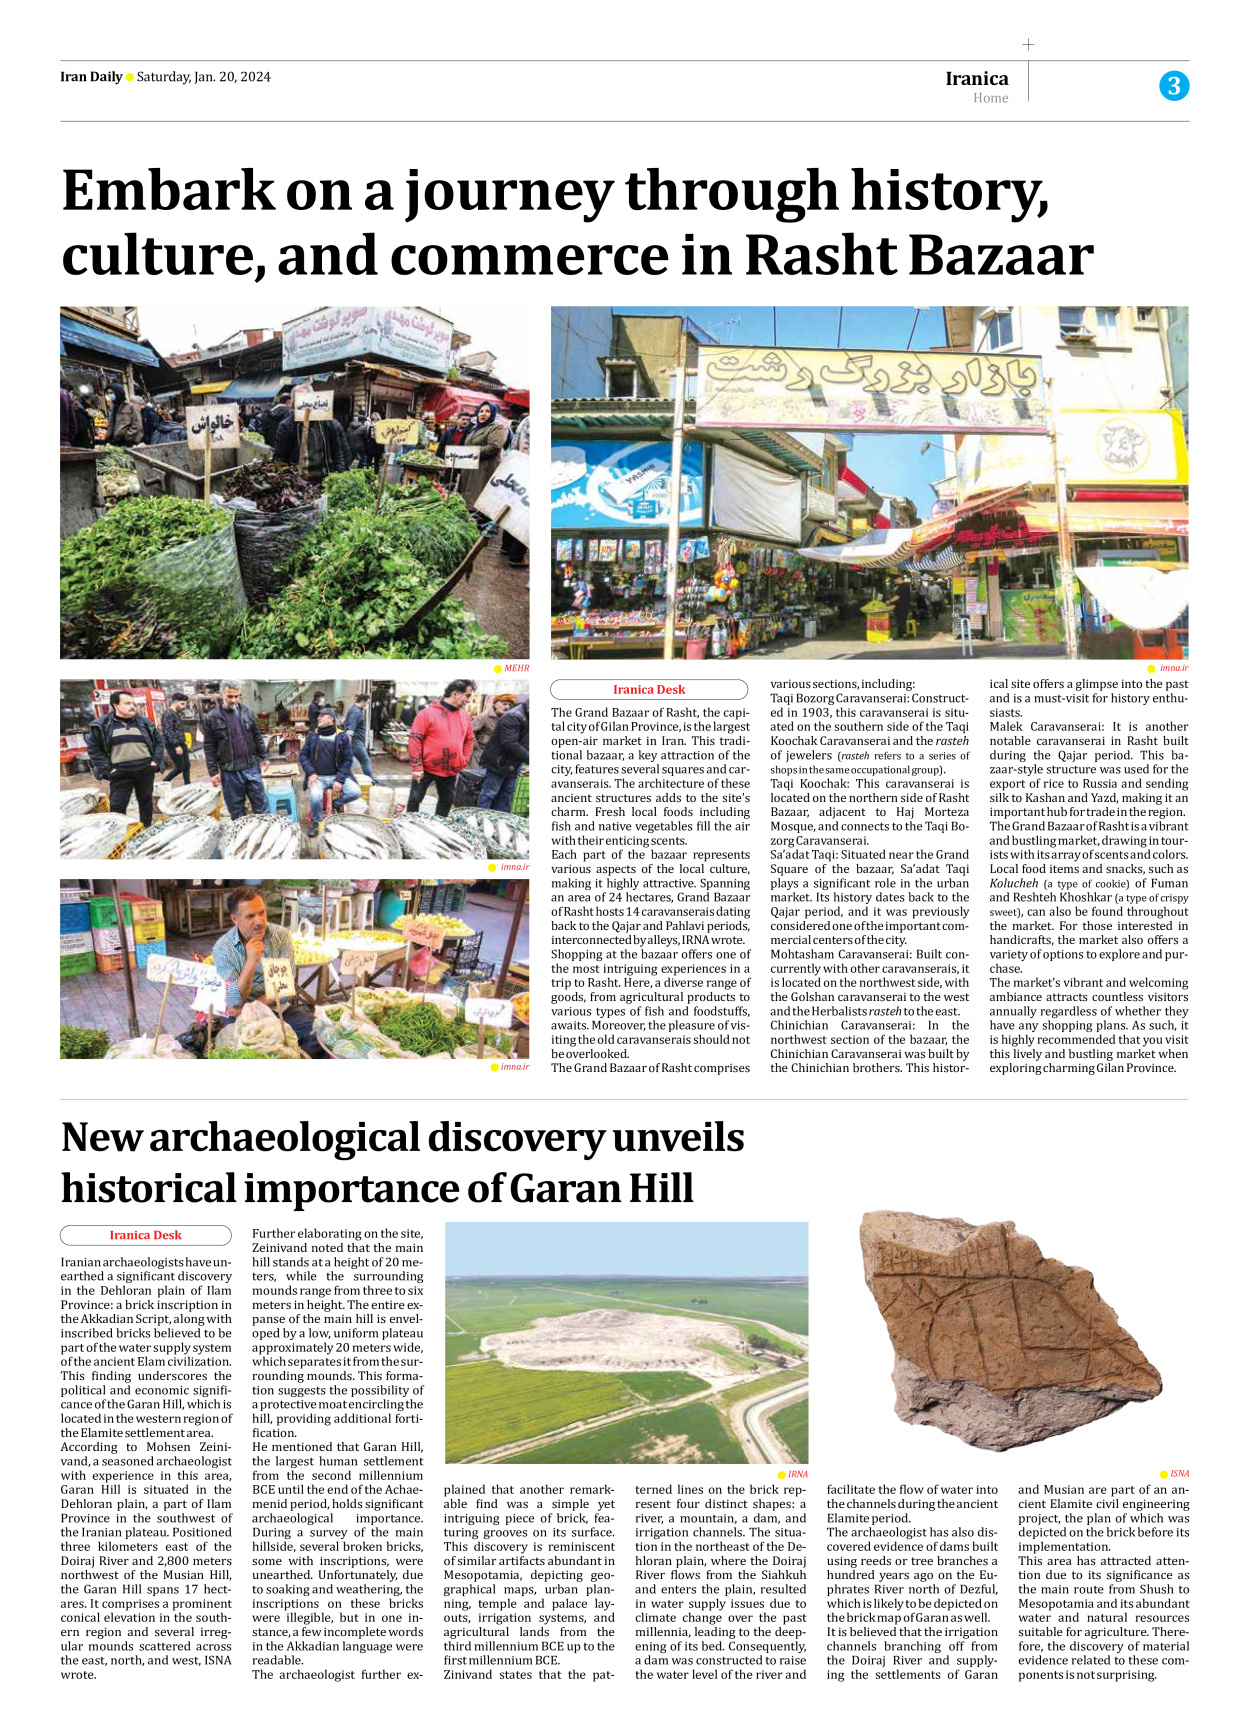 Iran Daily - Number Seven Thousand Four Hundred and Eighty Nine - 20 January 2024 - Page 3